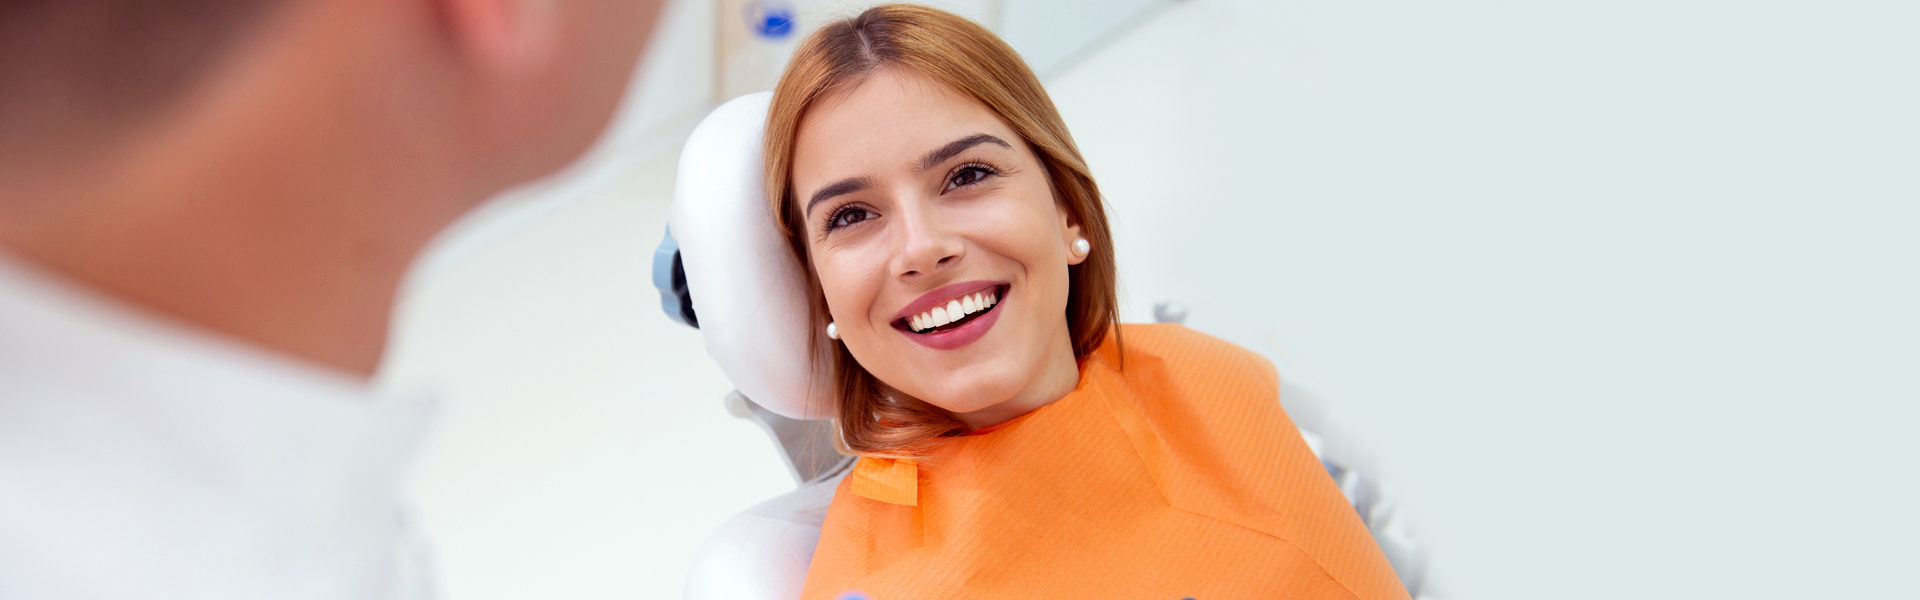 New Dental Advances Promise Better Outcomes for Treating Decay